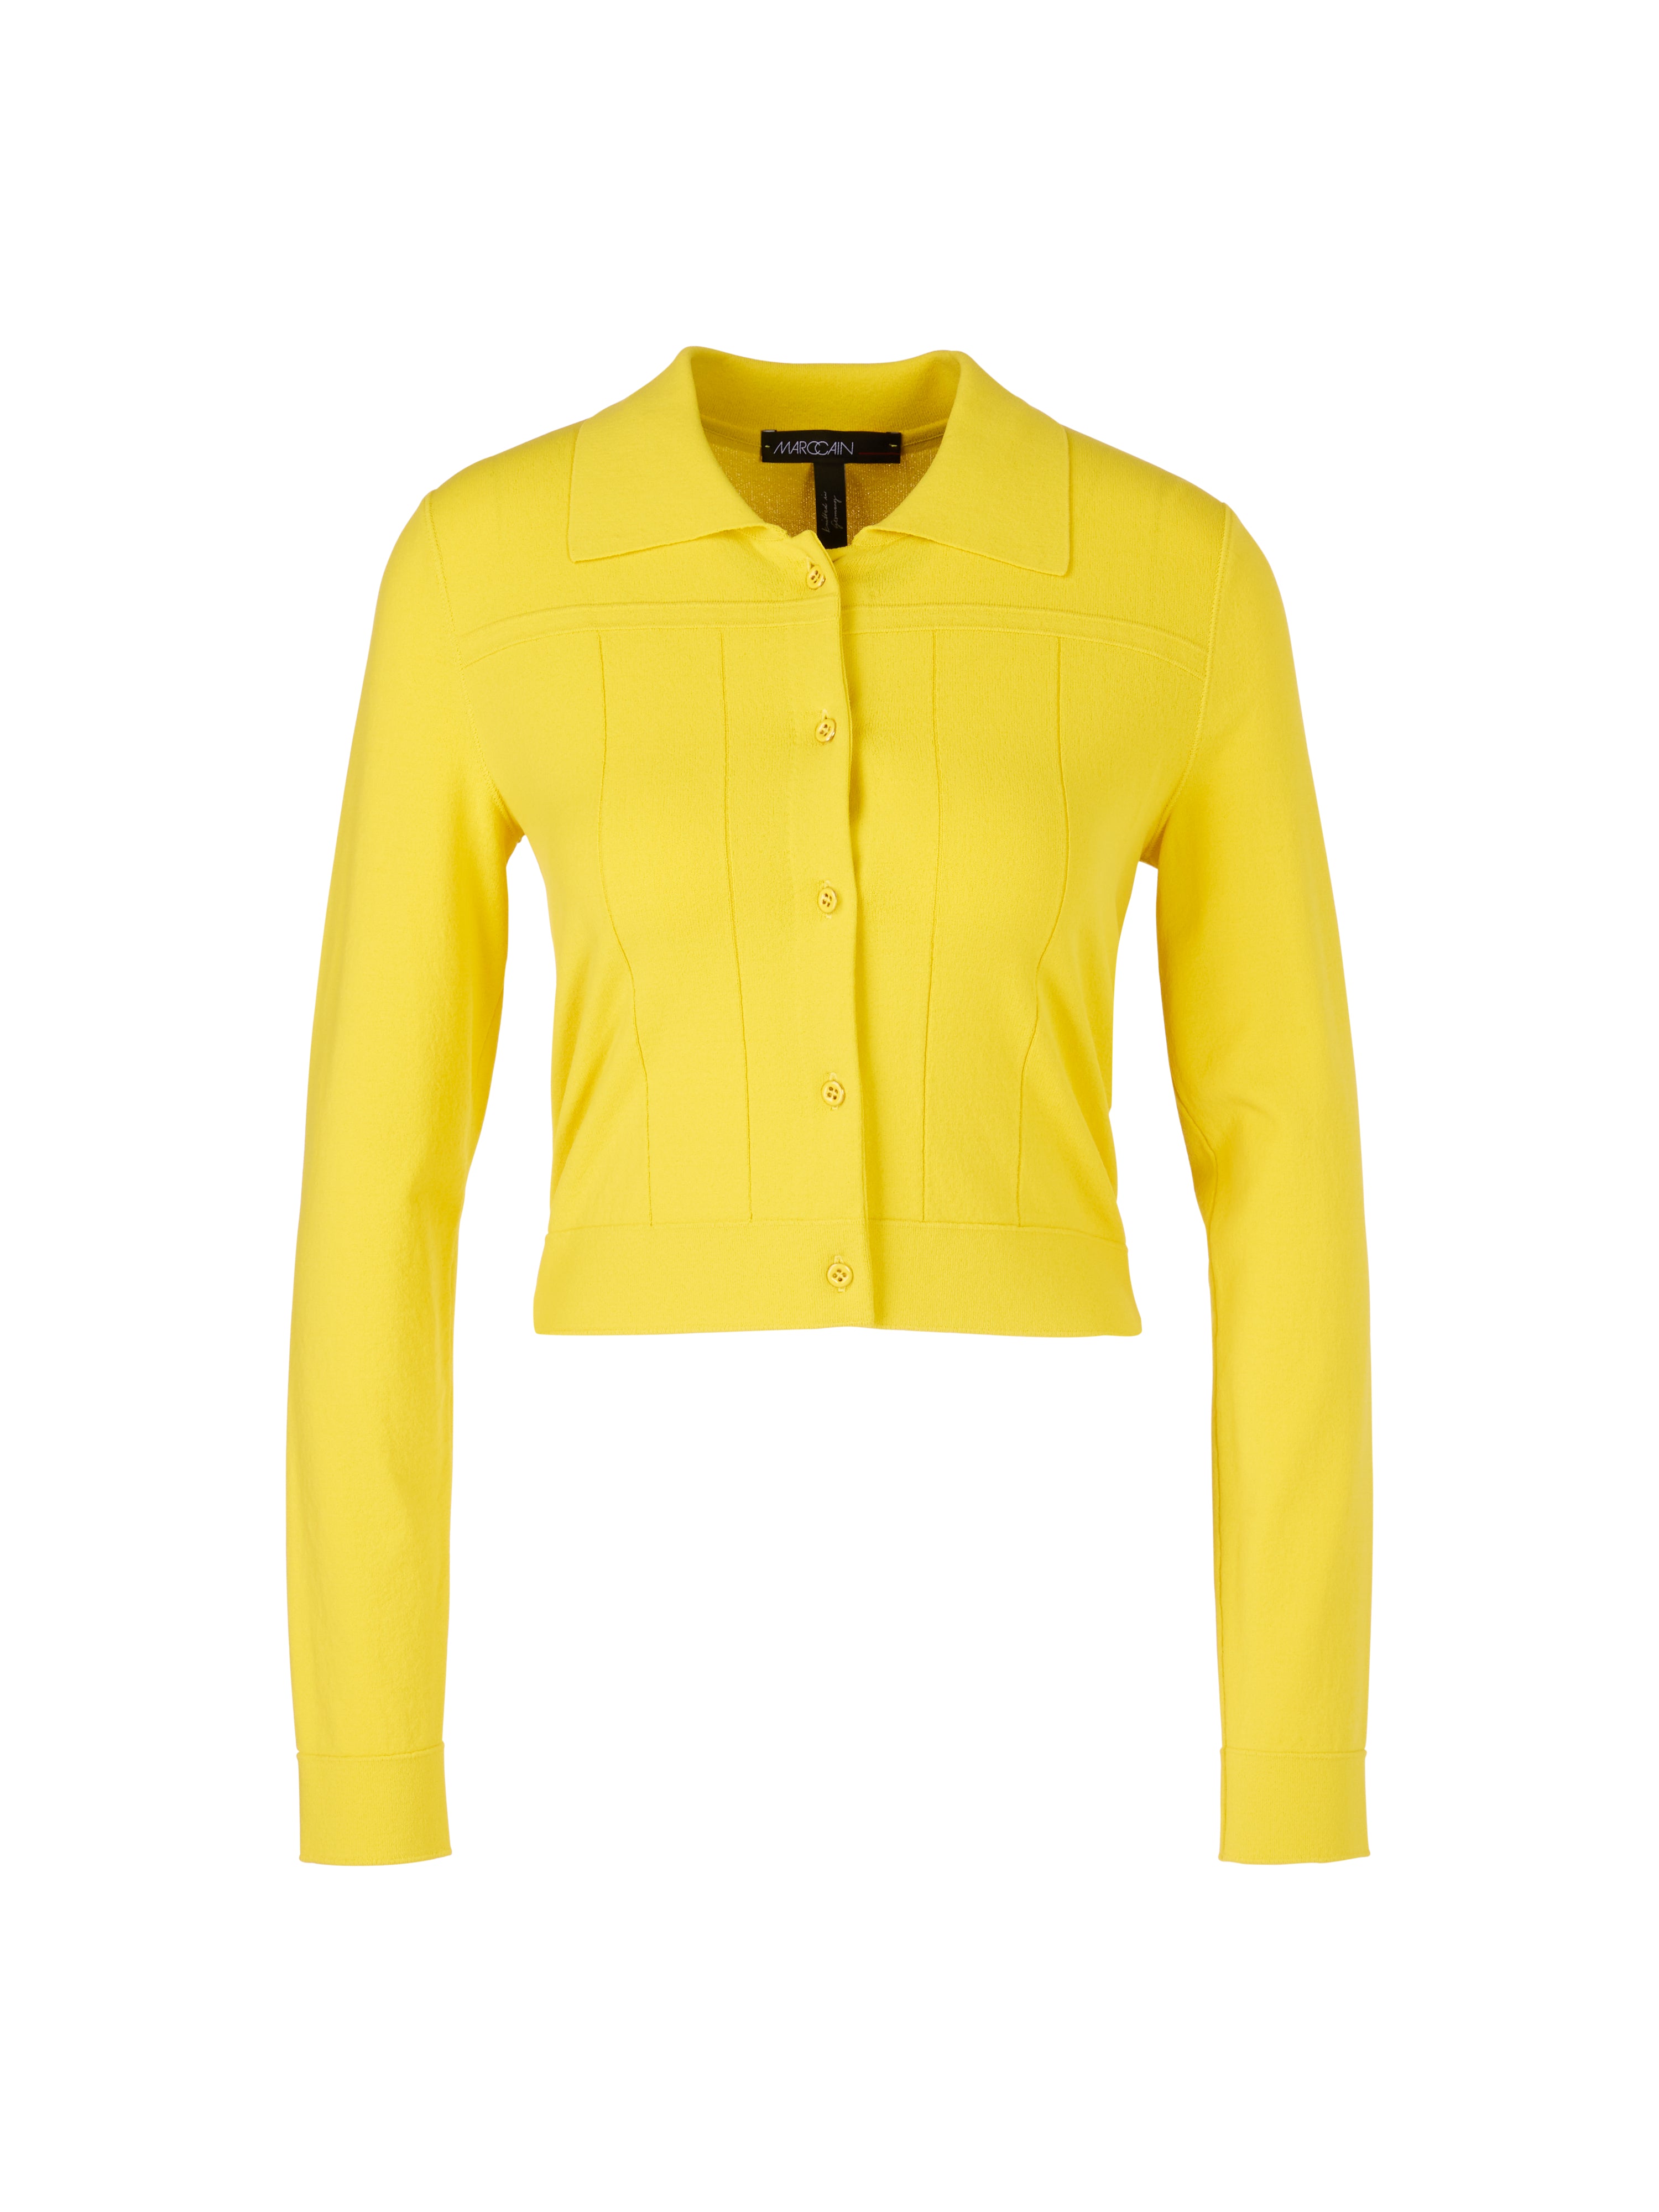 Marc Cain Collections Cardi Bright Sulphur WC39.20M12